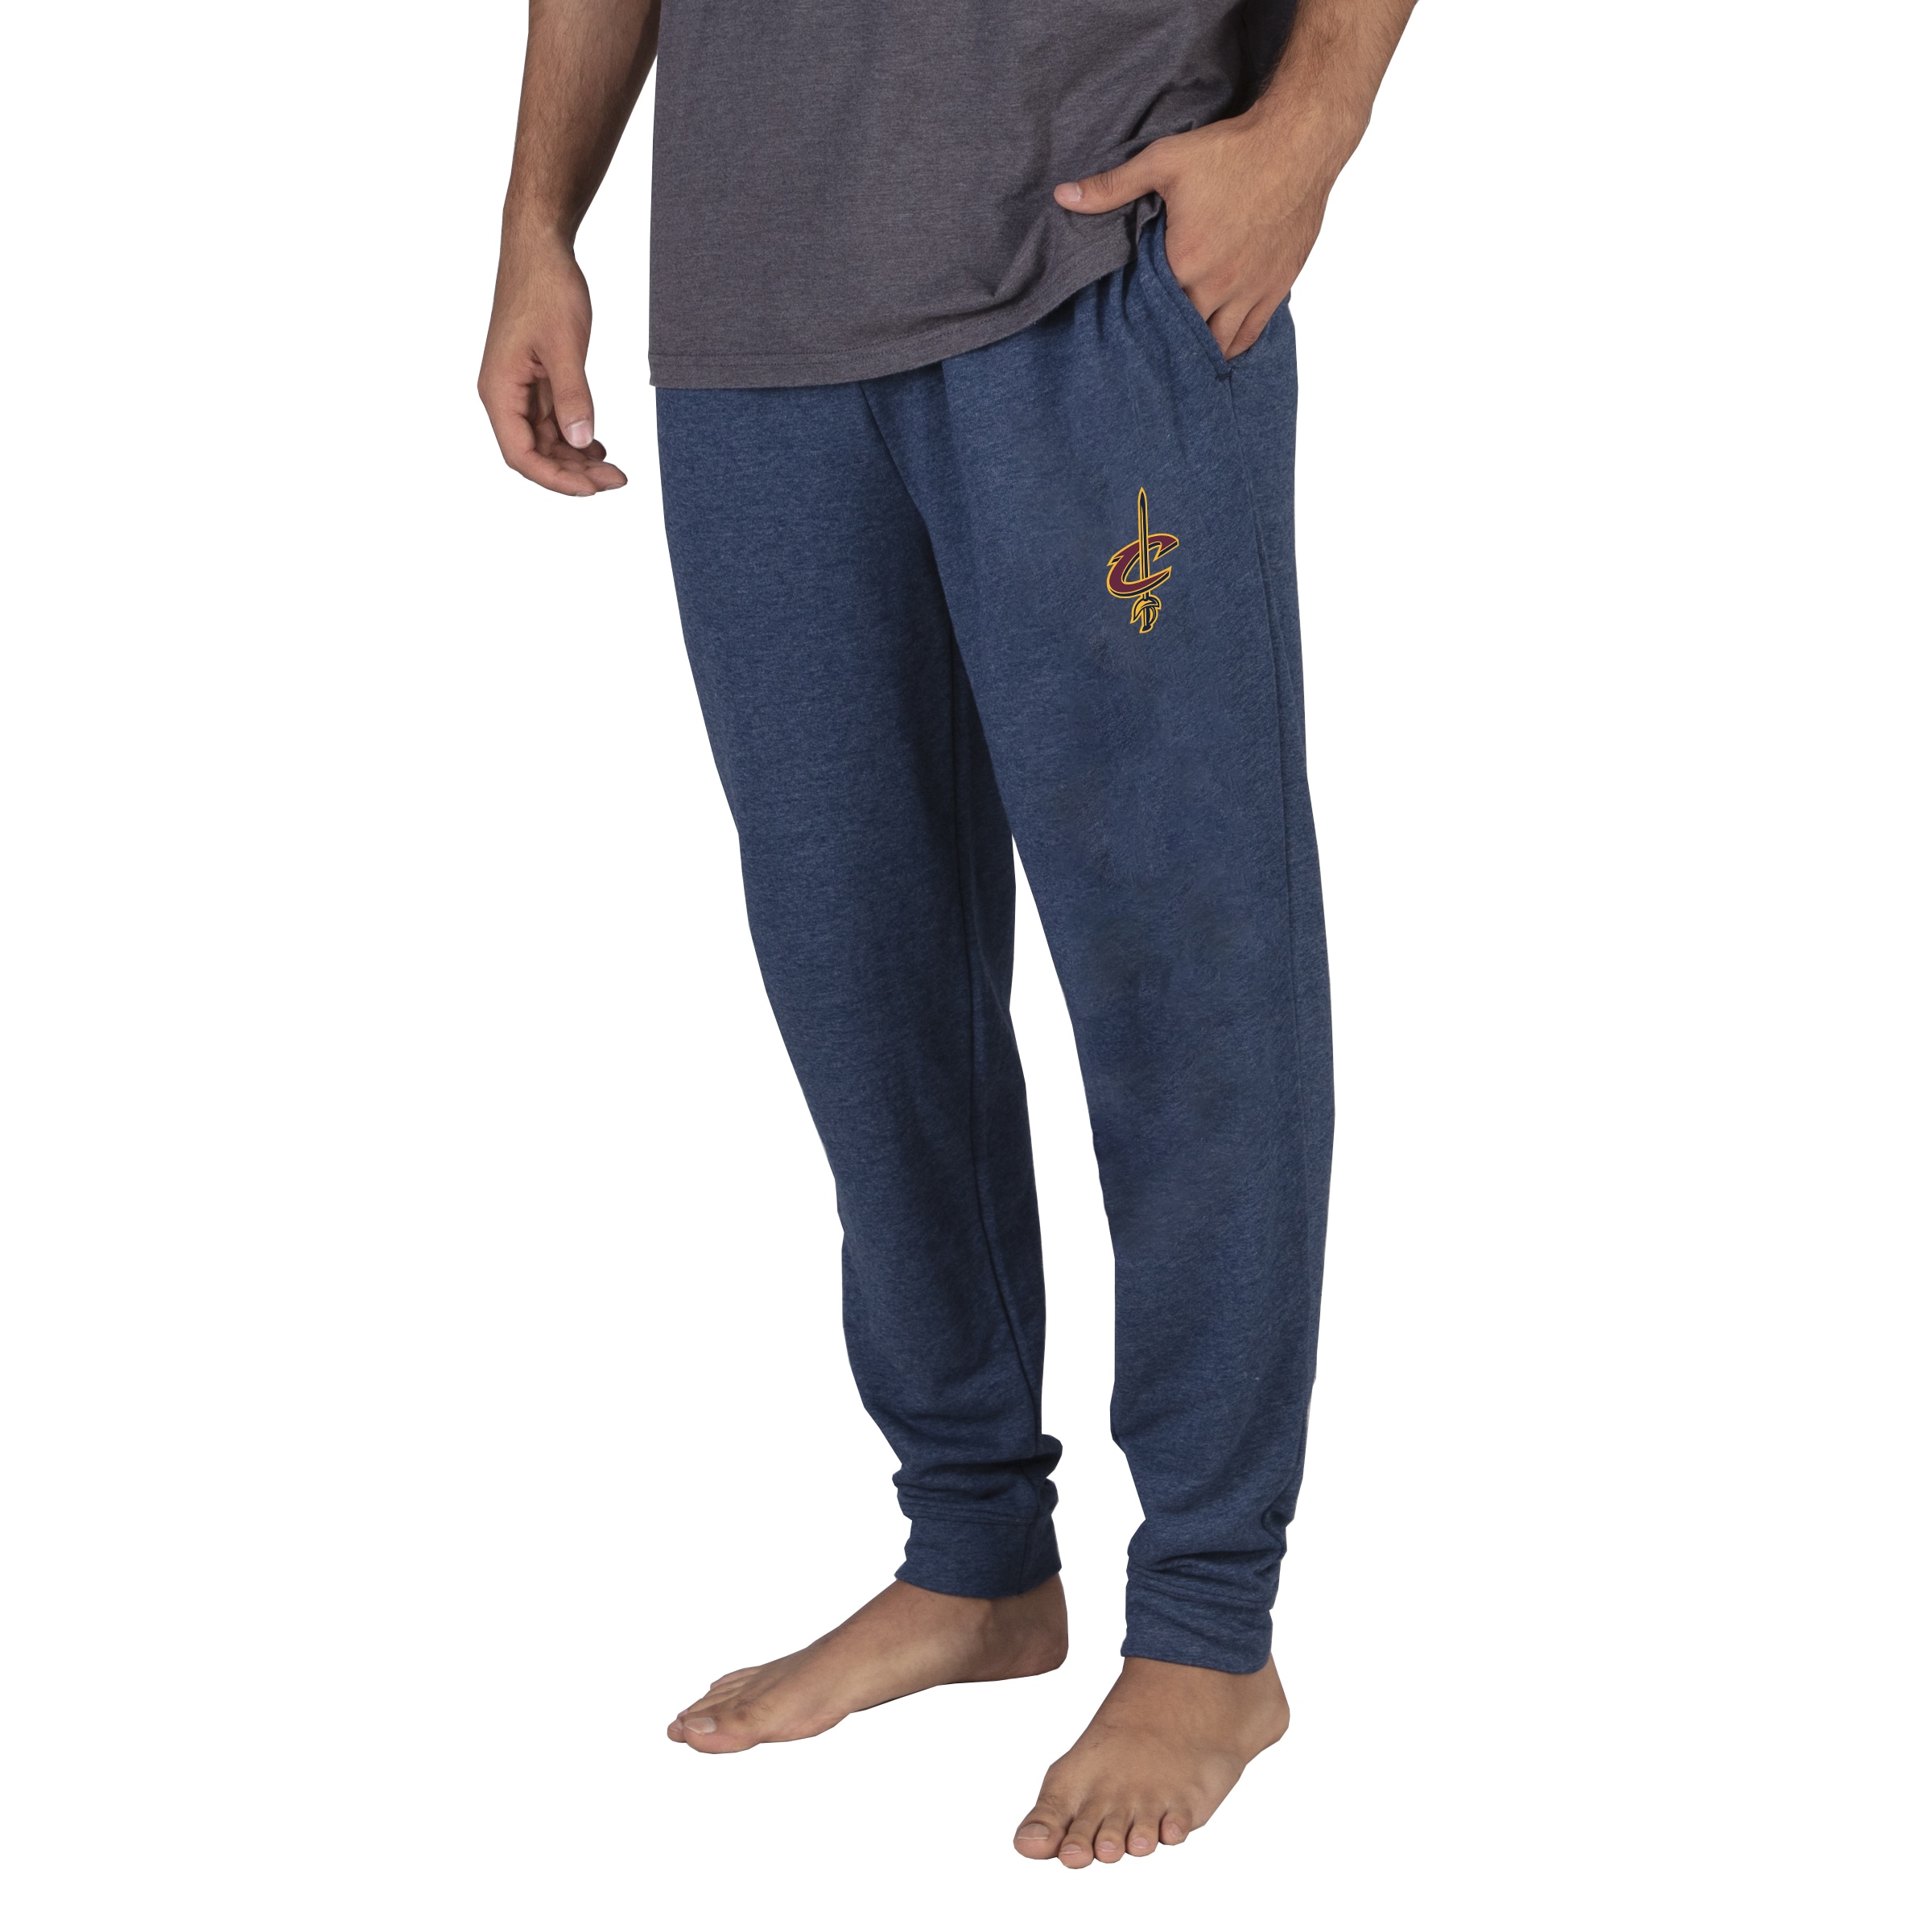 Men's Concepts Sport Navy Cleveland Cavaliers Mainstream Cuffed Terry Pants - image 1 of 1